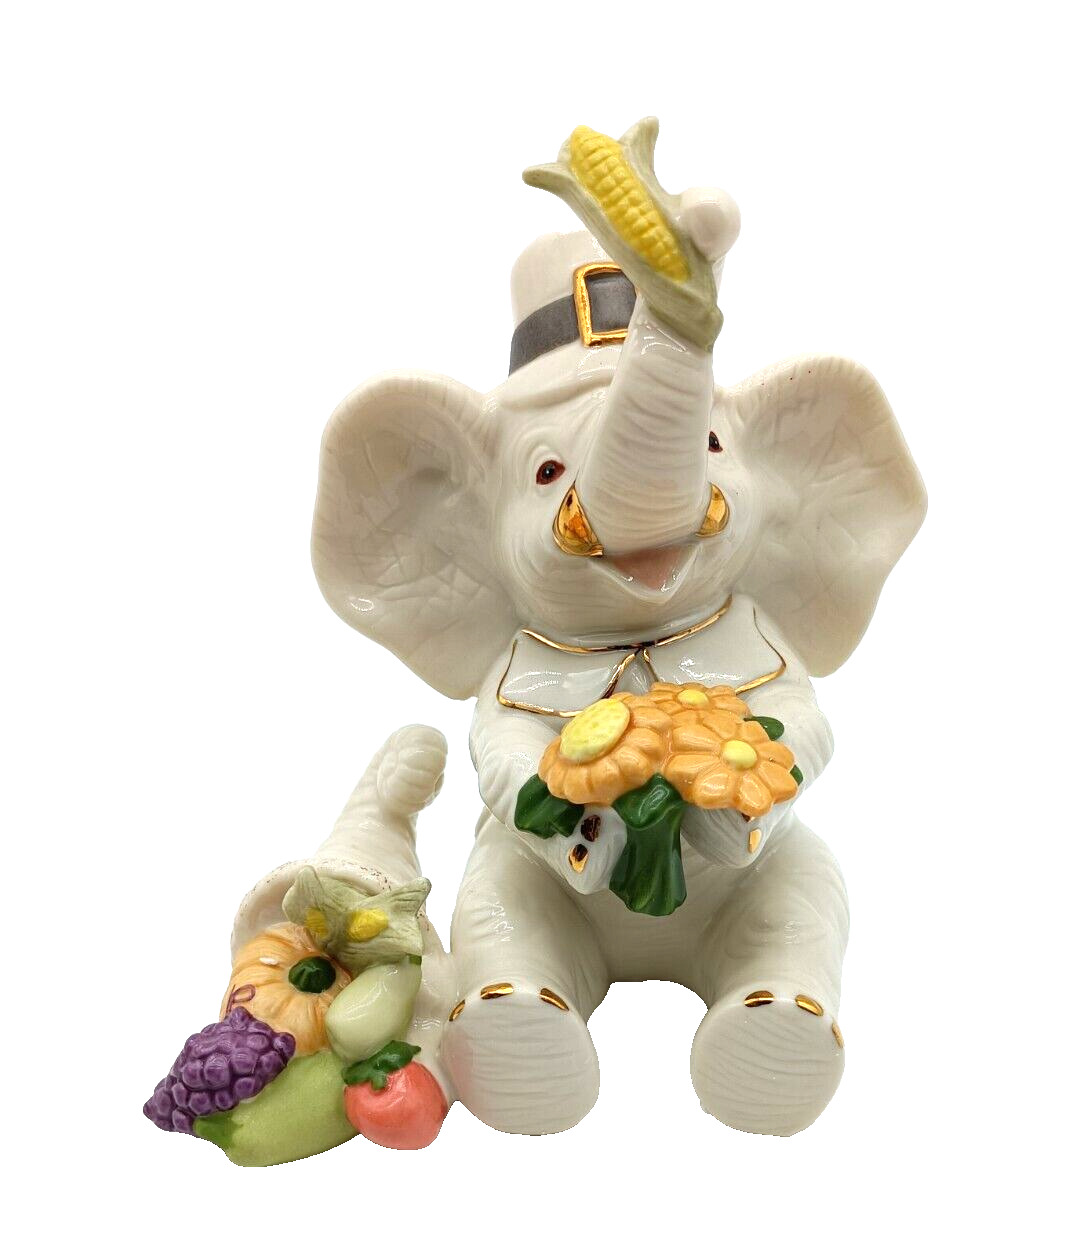 Lenox Pachyderm Elephant Porcelain Figurine Collectible Thanksgiving Gift